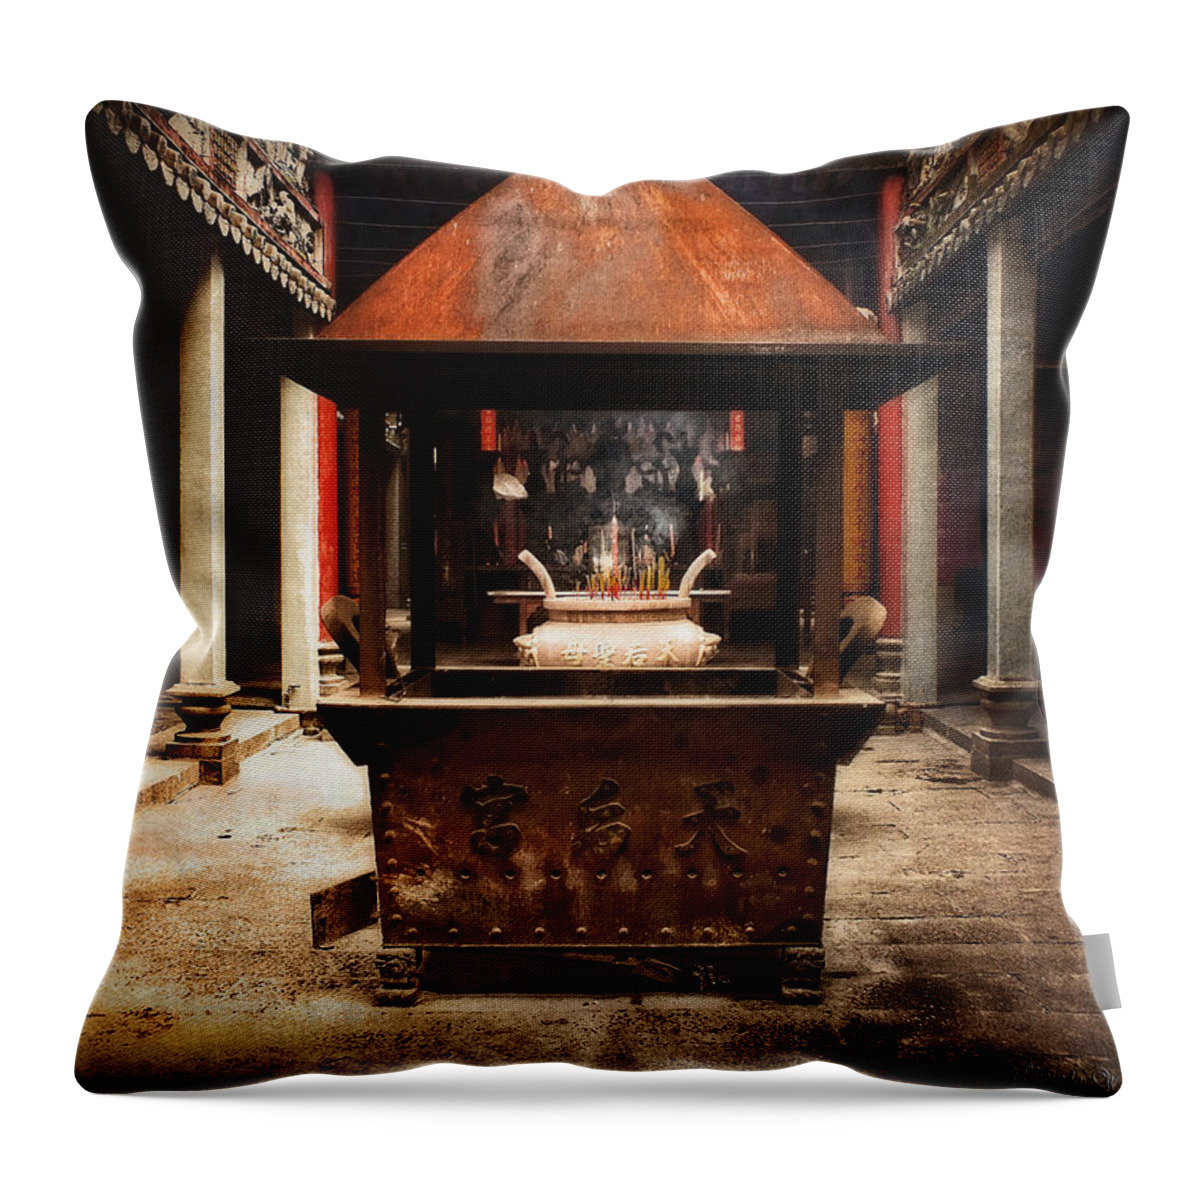 Lucinda Walter Throw Pillow featuring the photograph Thien Hau Temple by Lucinda Walter